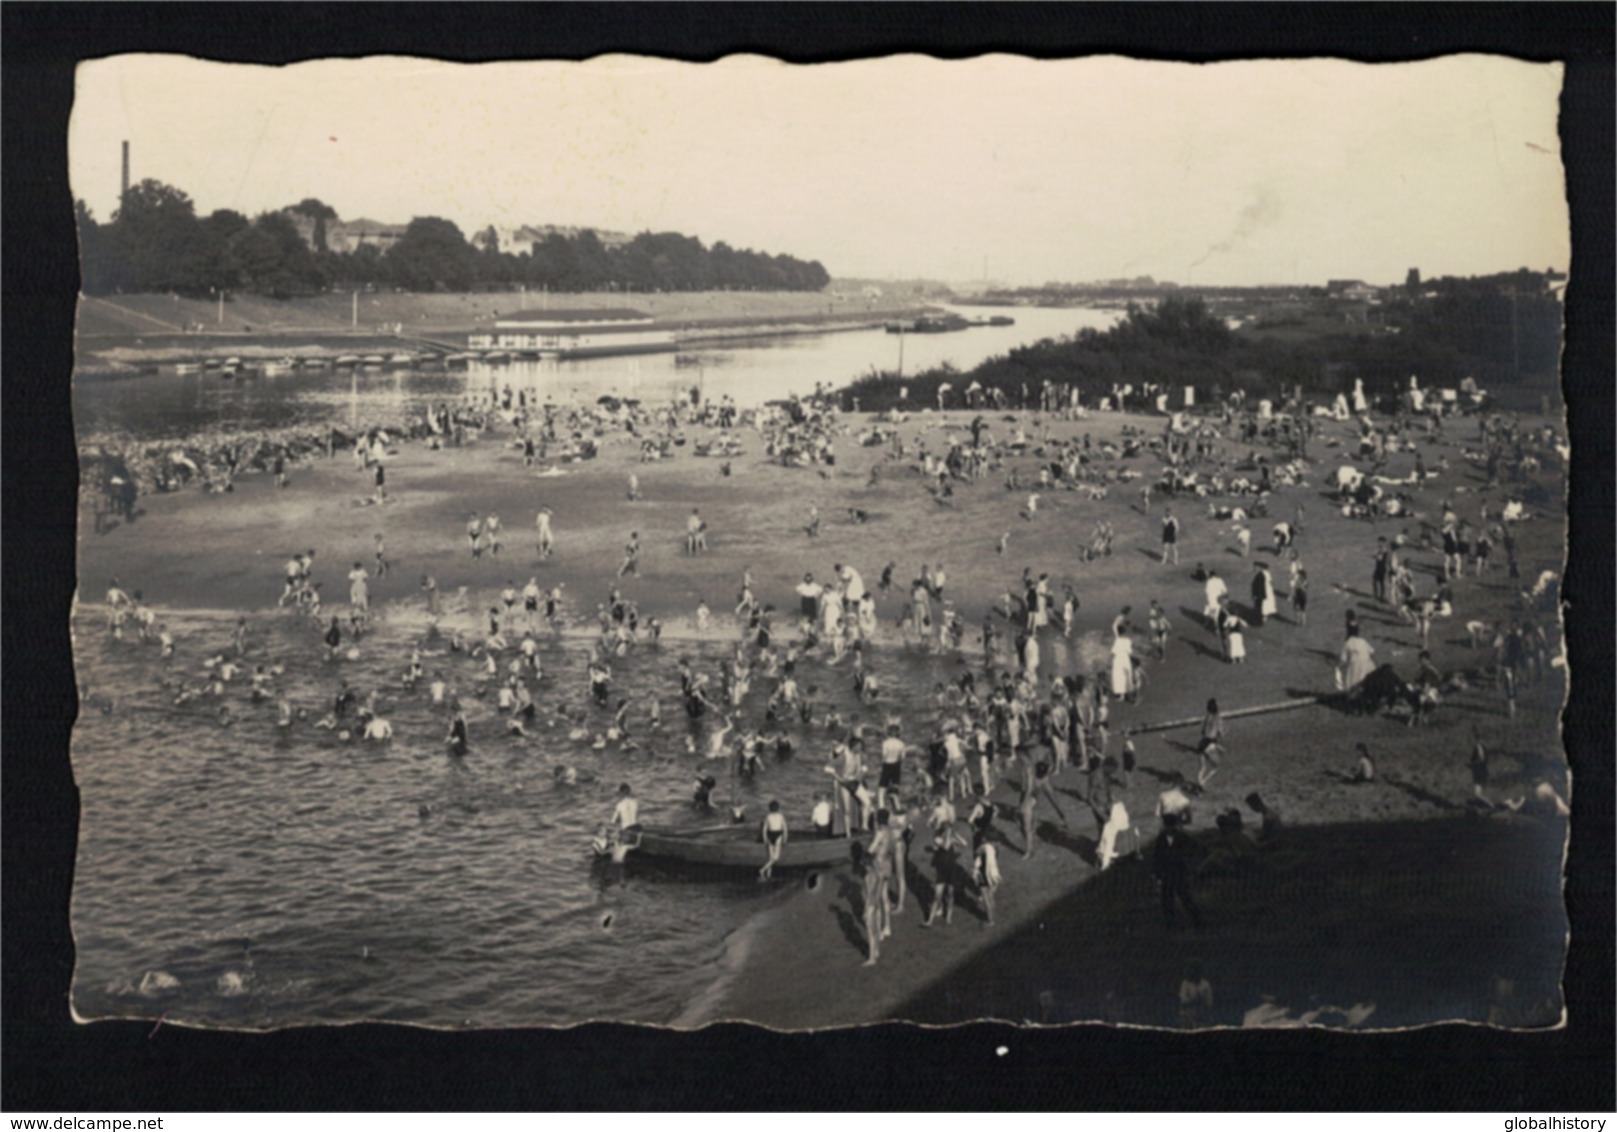 DE2300- BREMERHAVEN - PEOPLE SUNBATHE AND PLAYING IN THE RIVER - Bremerhaven